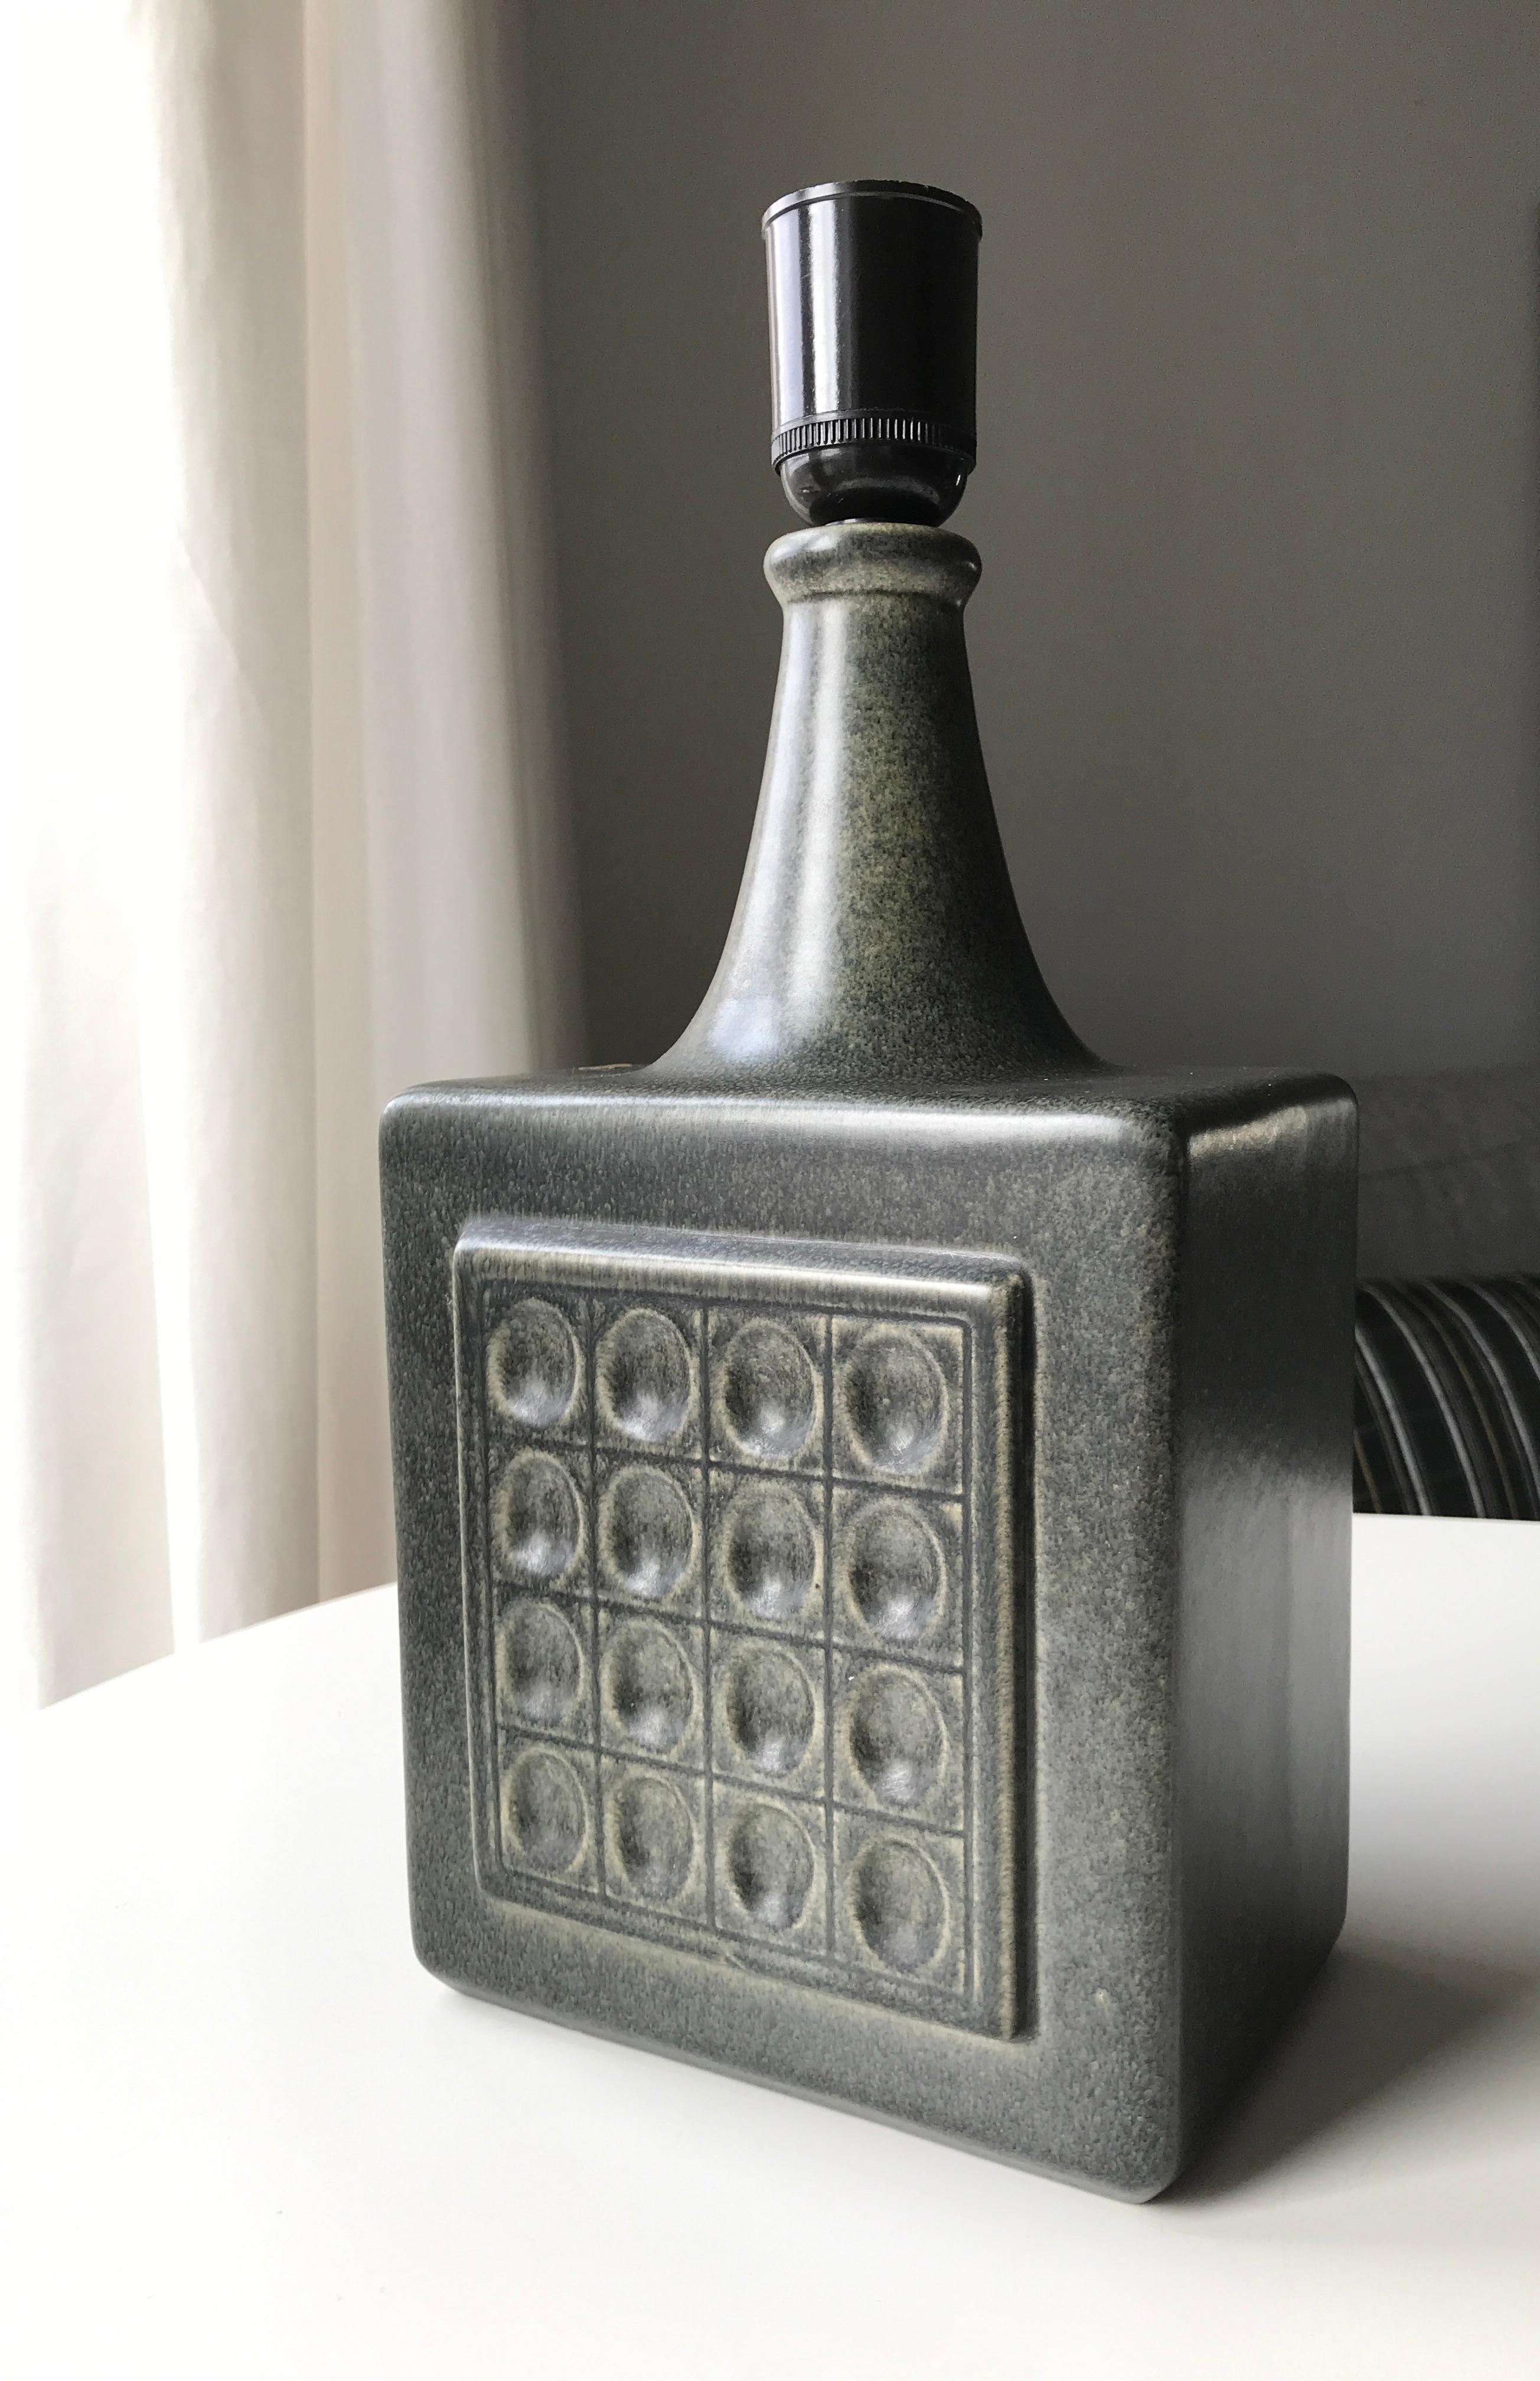 Swedish, late 20th century design table lamp from Brandi Keramik founded 1963 in southern Swedish west coast area Vejbystrand by Henri Brandi. Green rectangular base with relief decoration on front and rear. Mounted with black Bakelite bulb socket